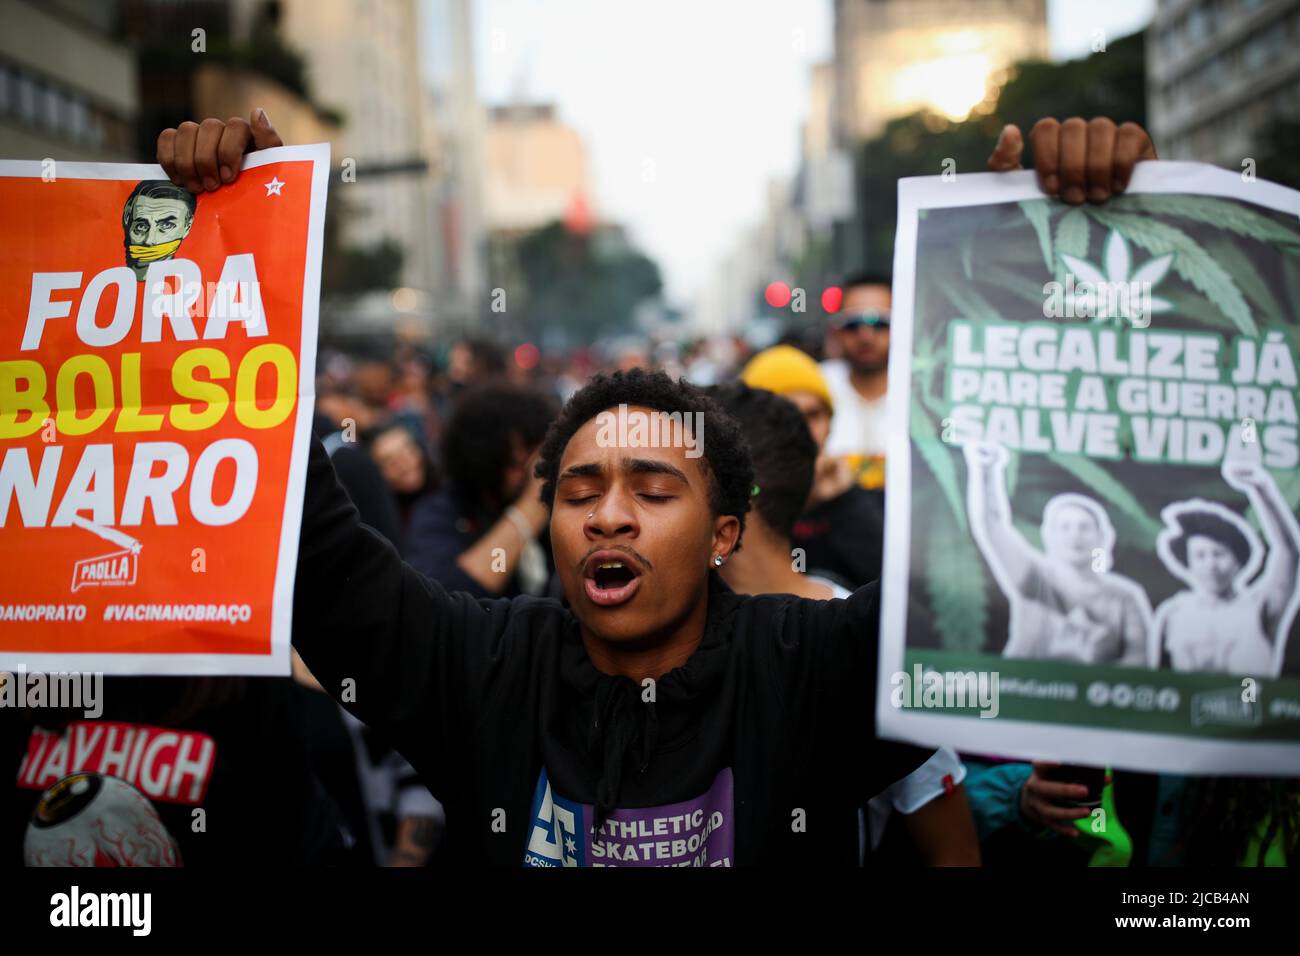 A man shouts as he takes part in the march for marijuana, in favor of the decriminalization of cannabis, in Sao Paulo, Brazil June 11, 2022. The banners read 'Out Bolsonaro' and 'Legalize Now, Stop the war, save lives.' REUTERS/Amanda Perobelli Stock Photo